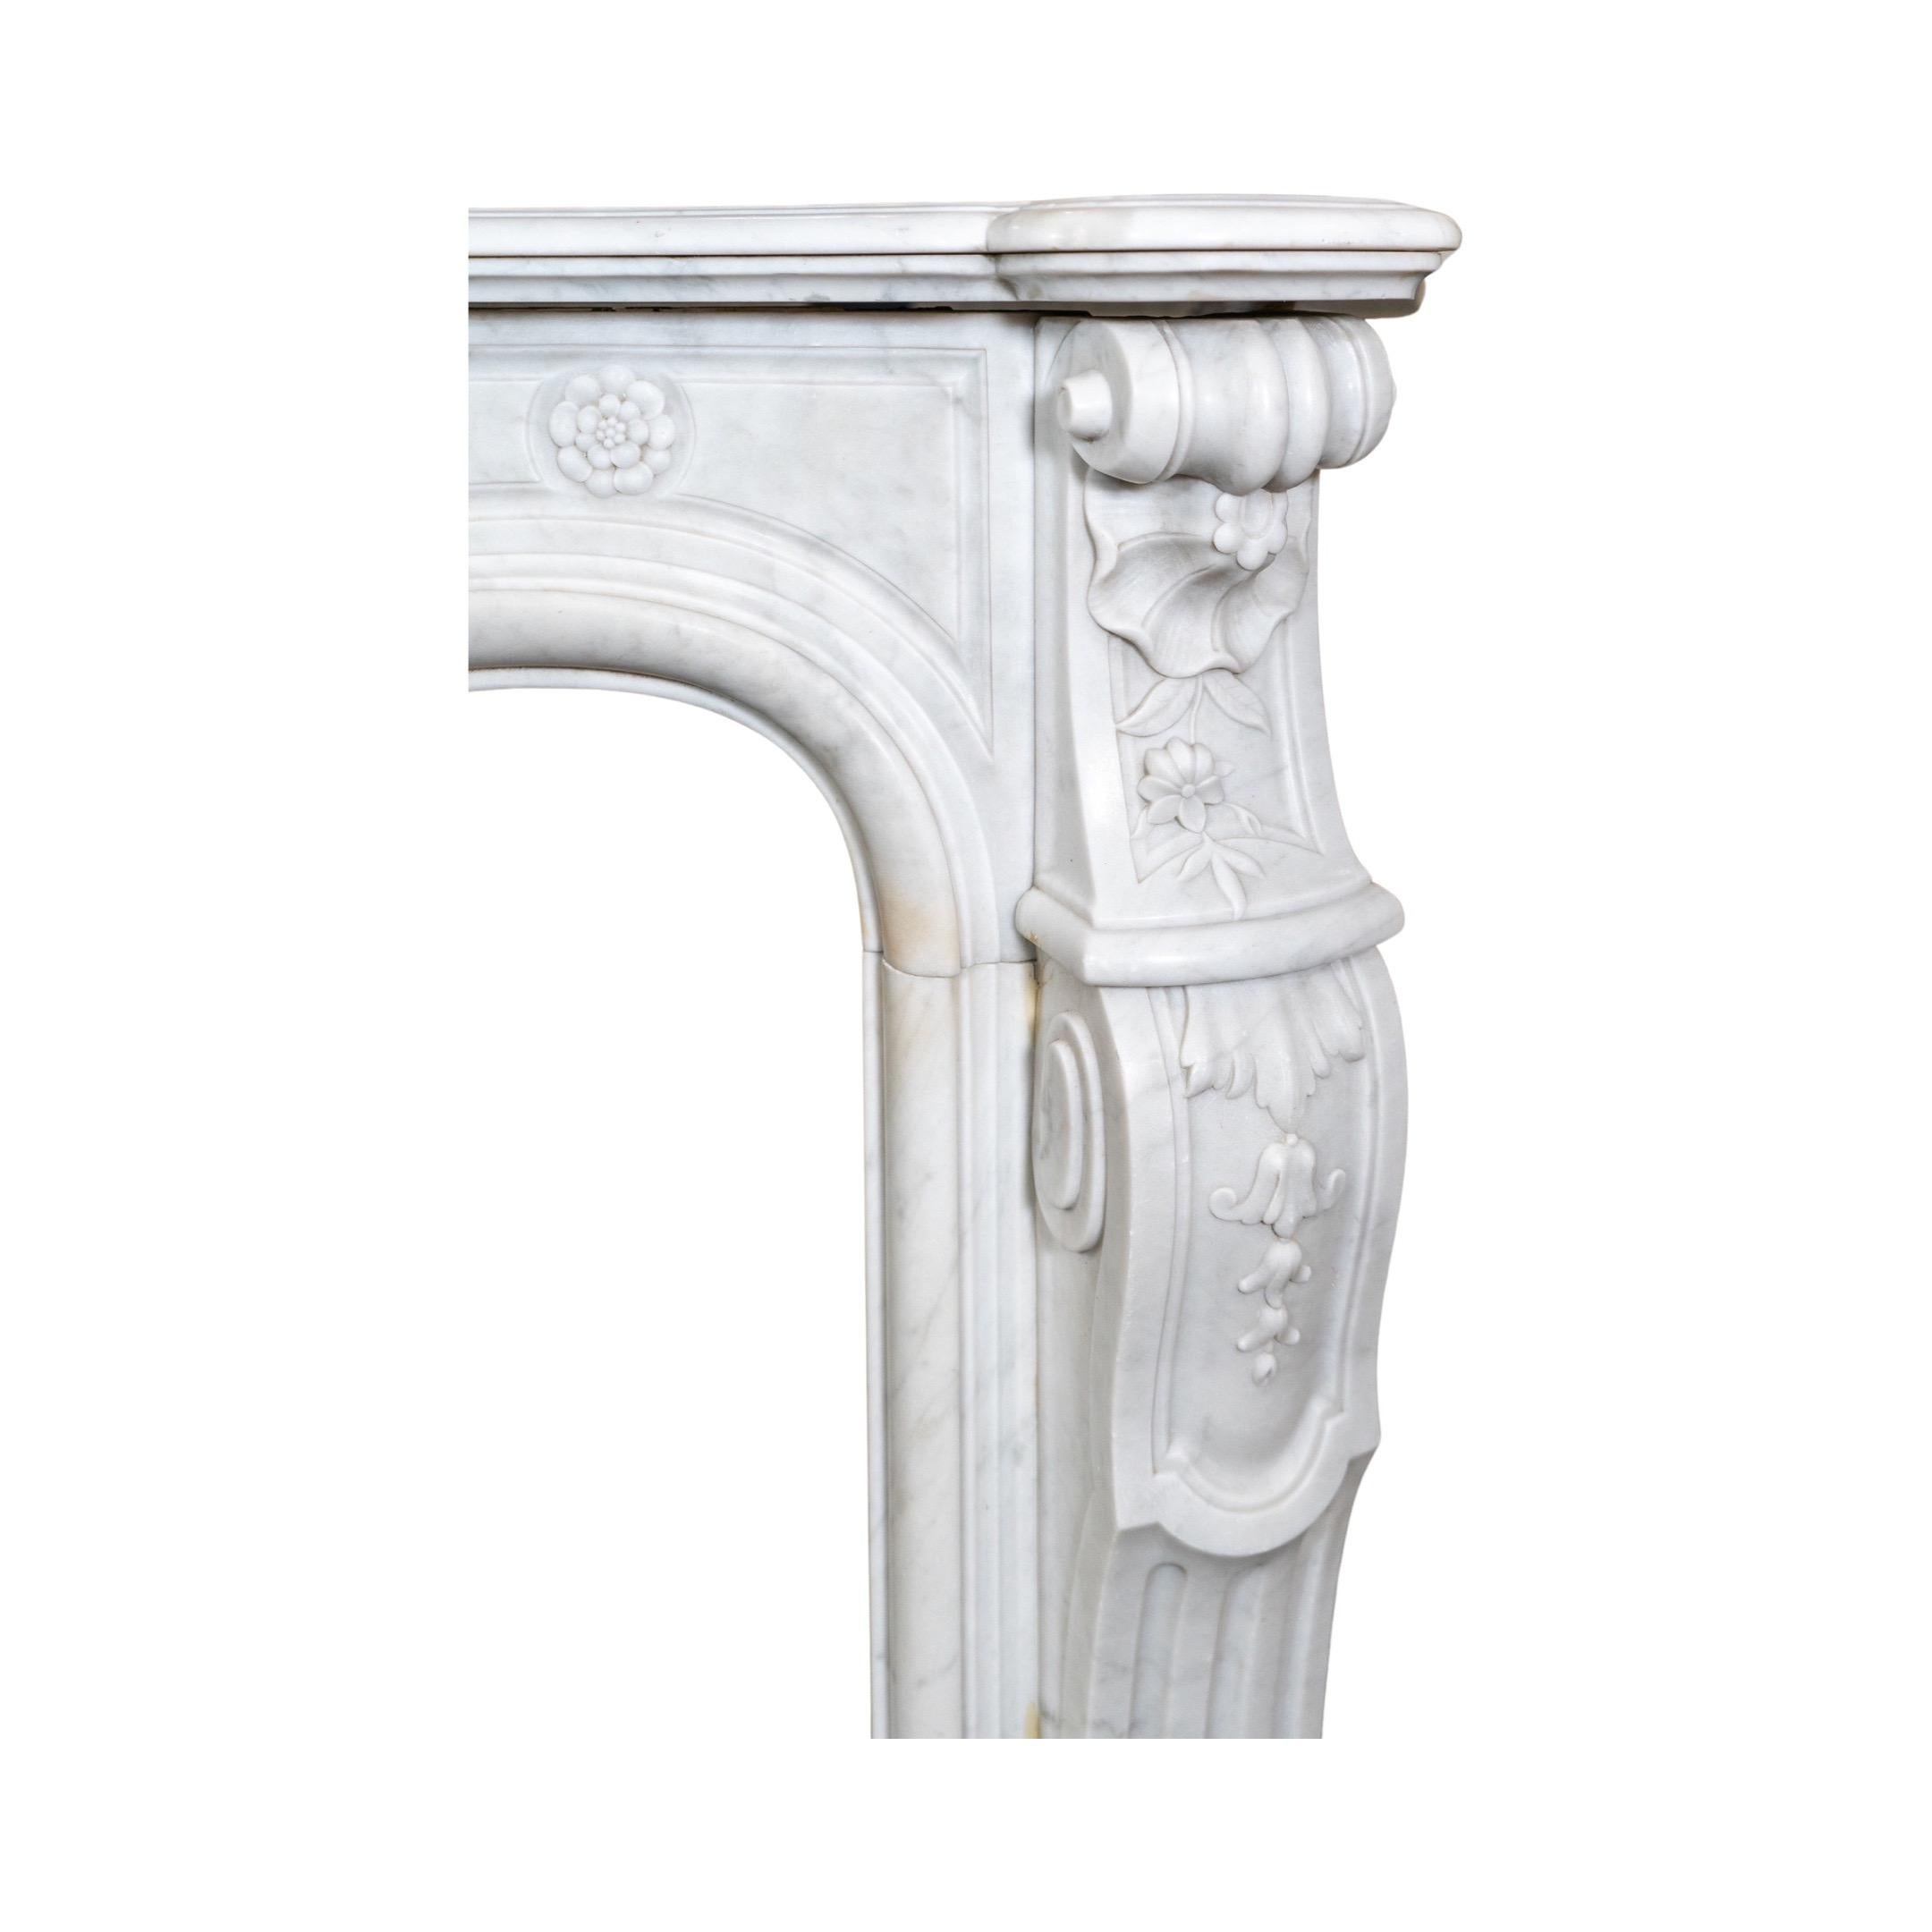 Late 19th Century French White Veined Carrara Marble Mantel